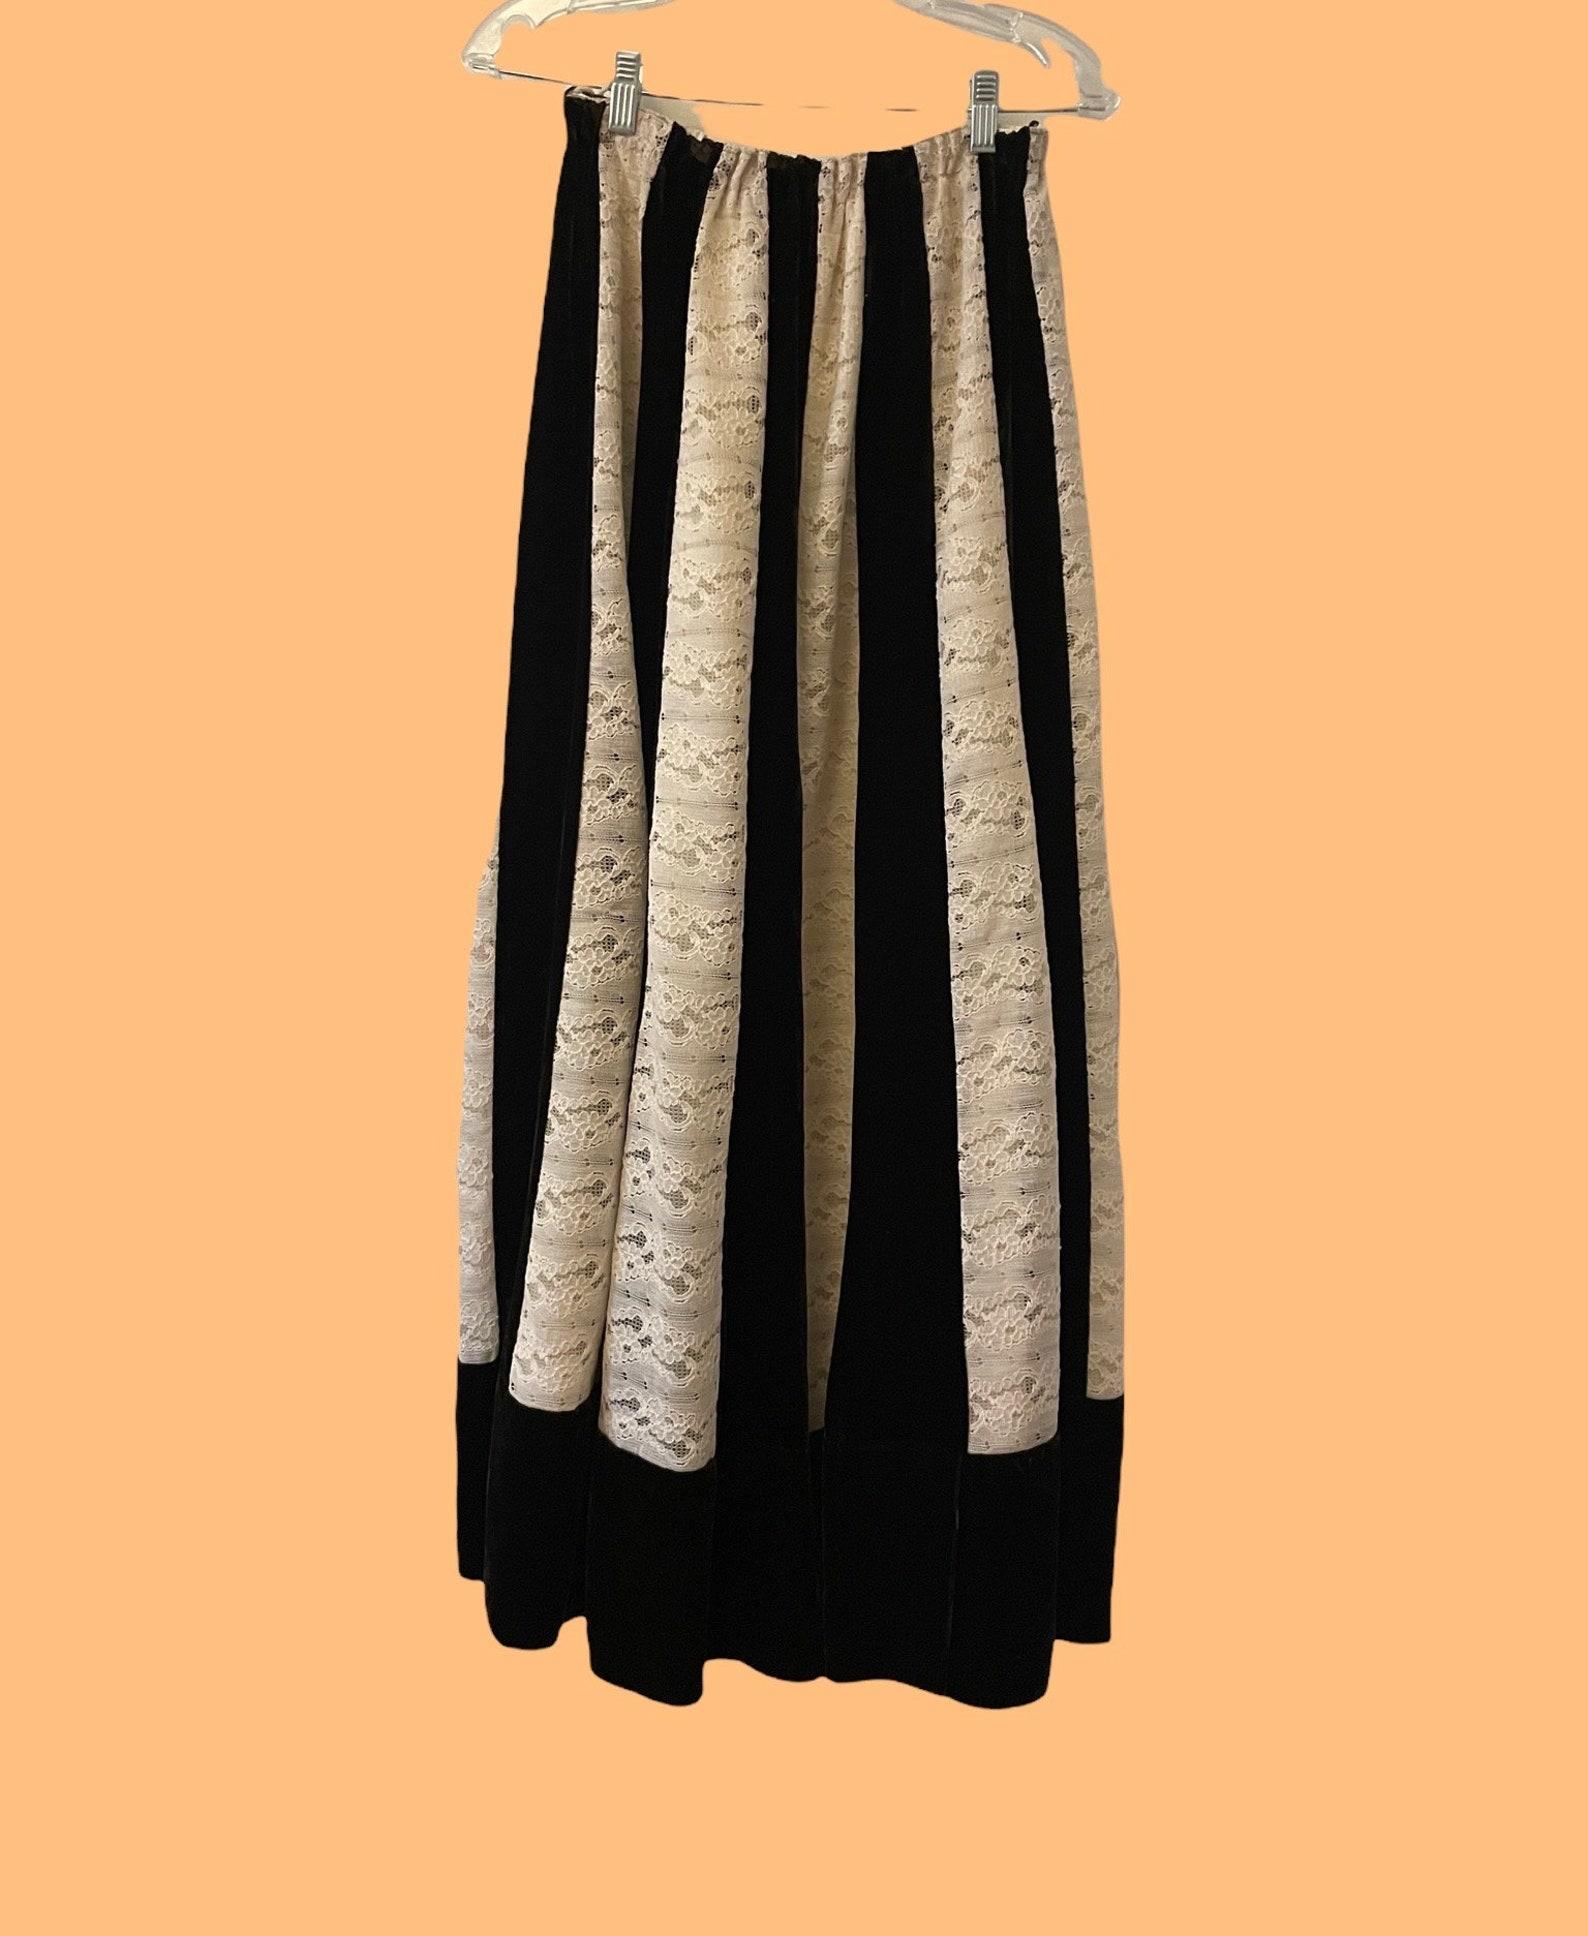 Brown Velvet and Cream Lace Maxi Skirt, Circa 1970s For Sale 3